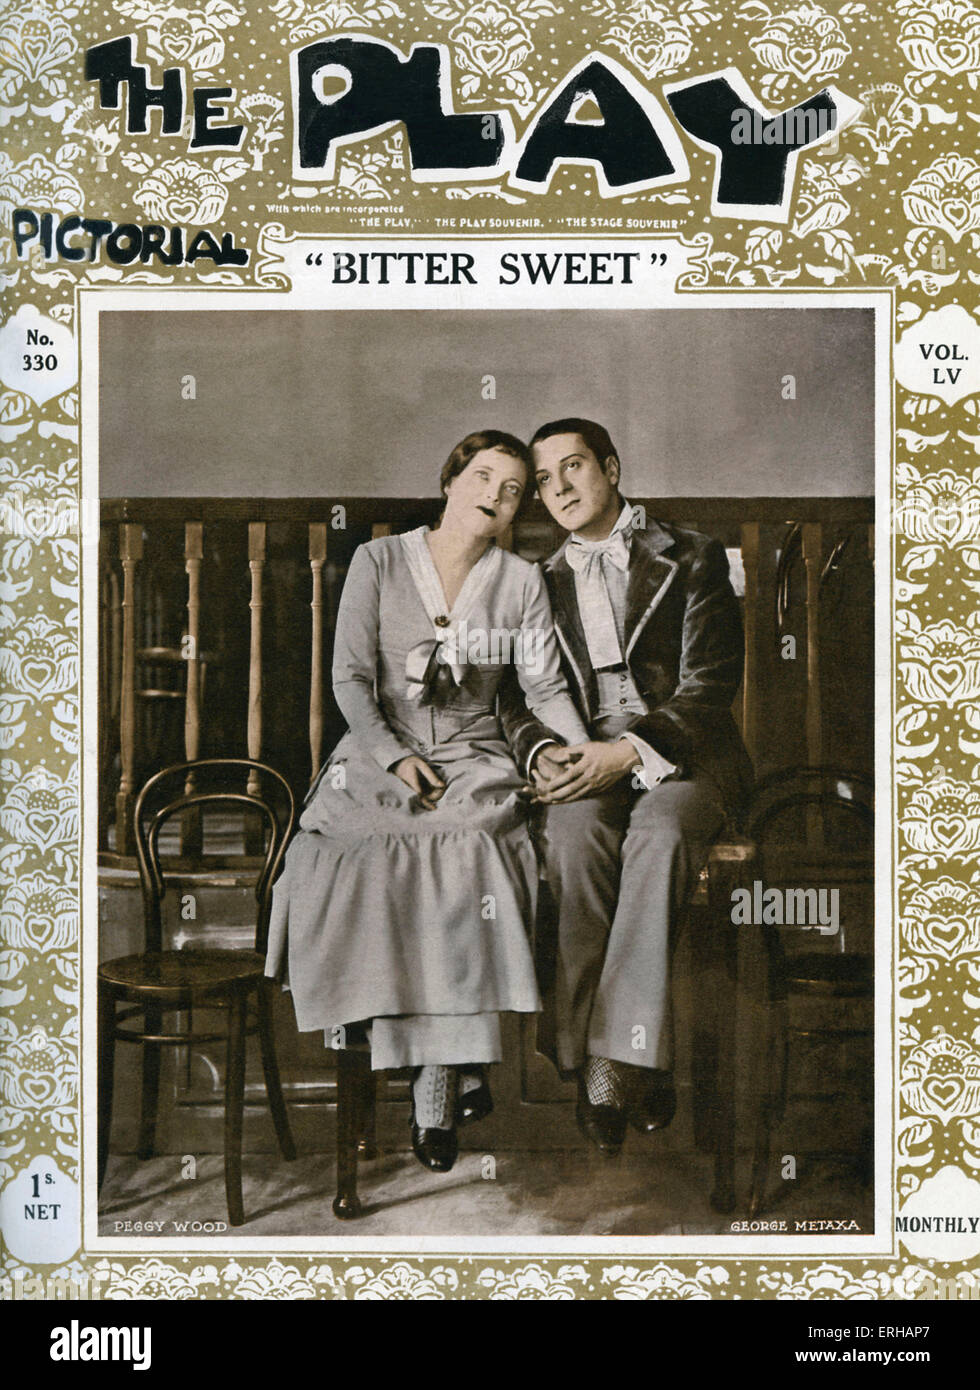 Bitter Sweet by Charles Cochran (1872-1951), 1929. Shayne, played by Peggy Wood (1892-1978), and Carl, played by George Metaxa. Stock Photo